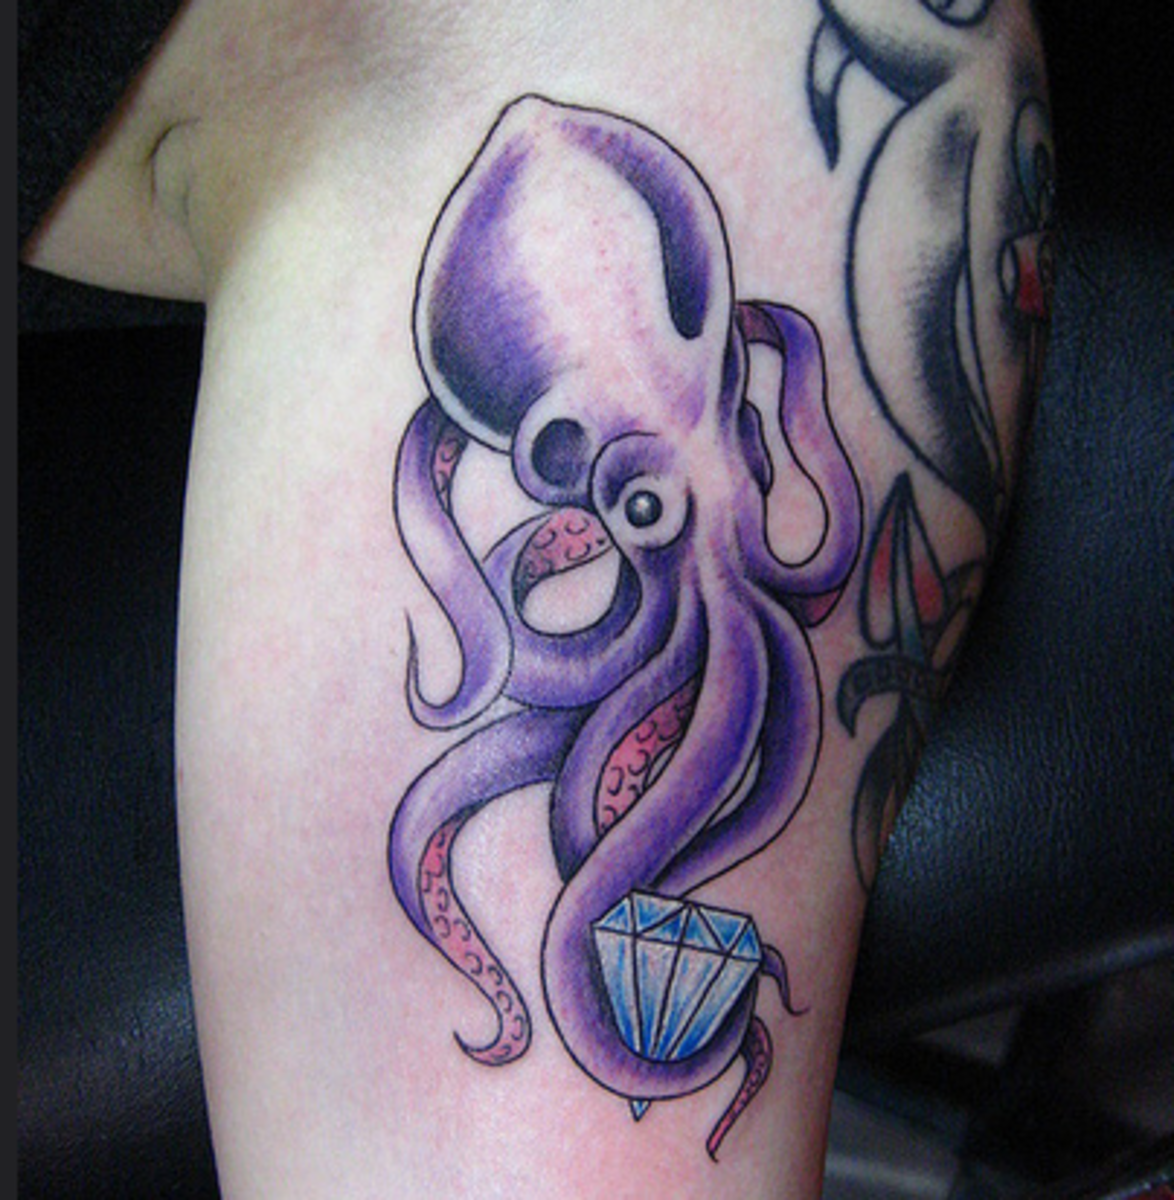 A diamond is held by the tentacles of a squid in this representation.